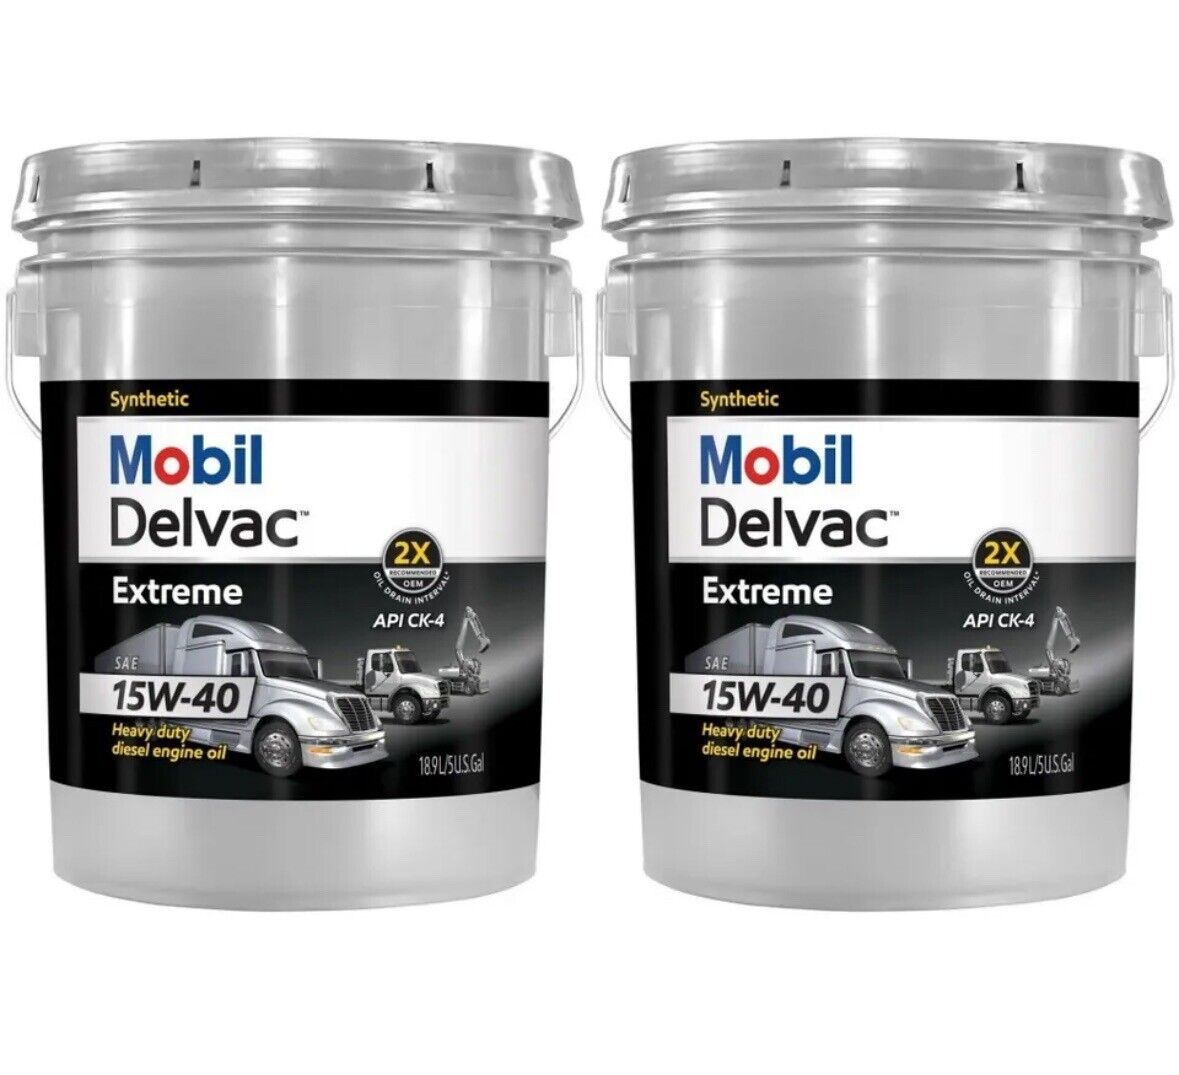 (2 Pack) Mobil Delvac Extreme Heavy Duty Full Synthetic Diesel Oil 15W-40, 5 gal